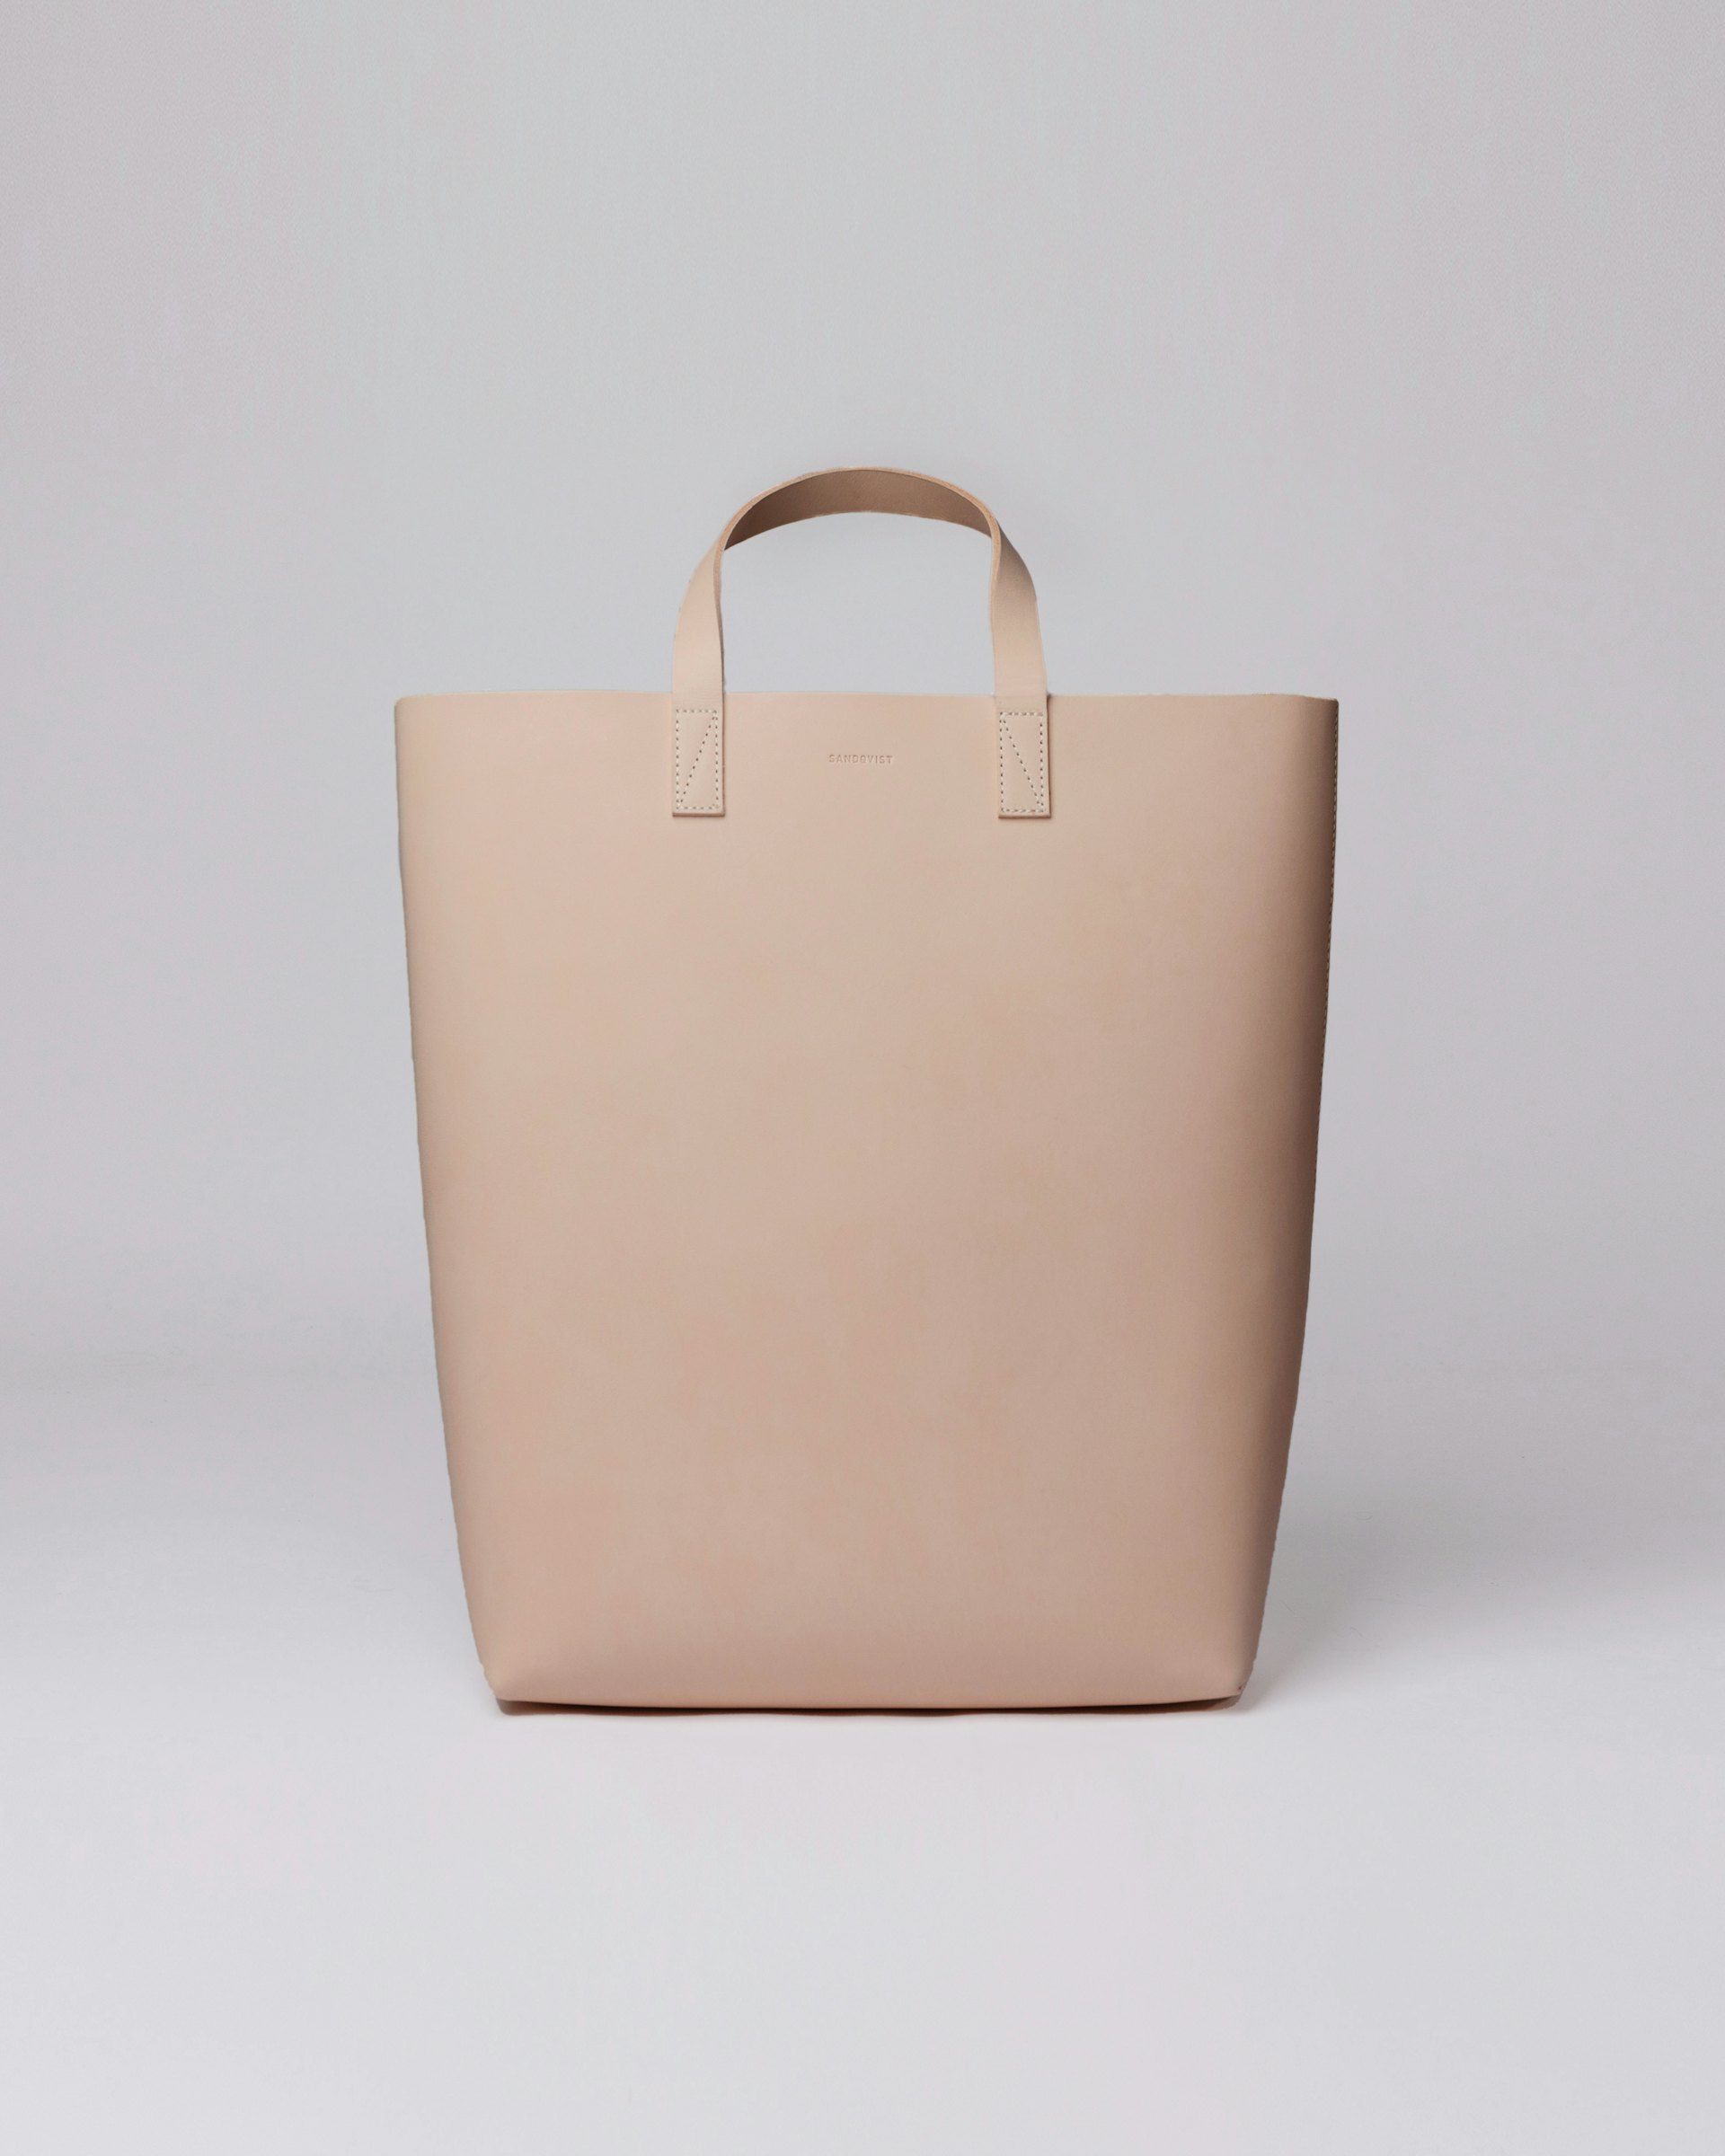 Gerry belongs to the category Tote bags and is in color natural leather